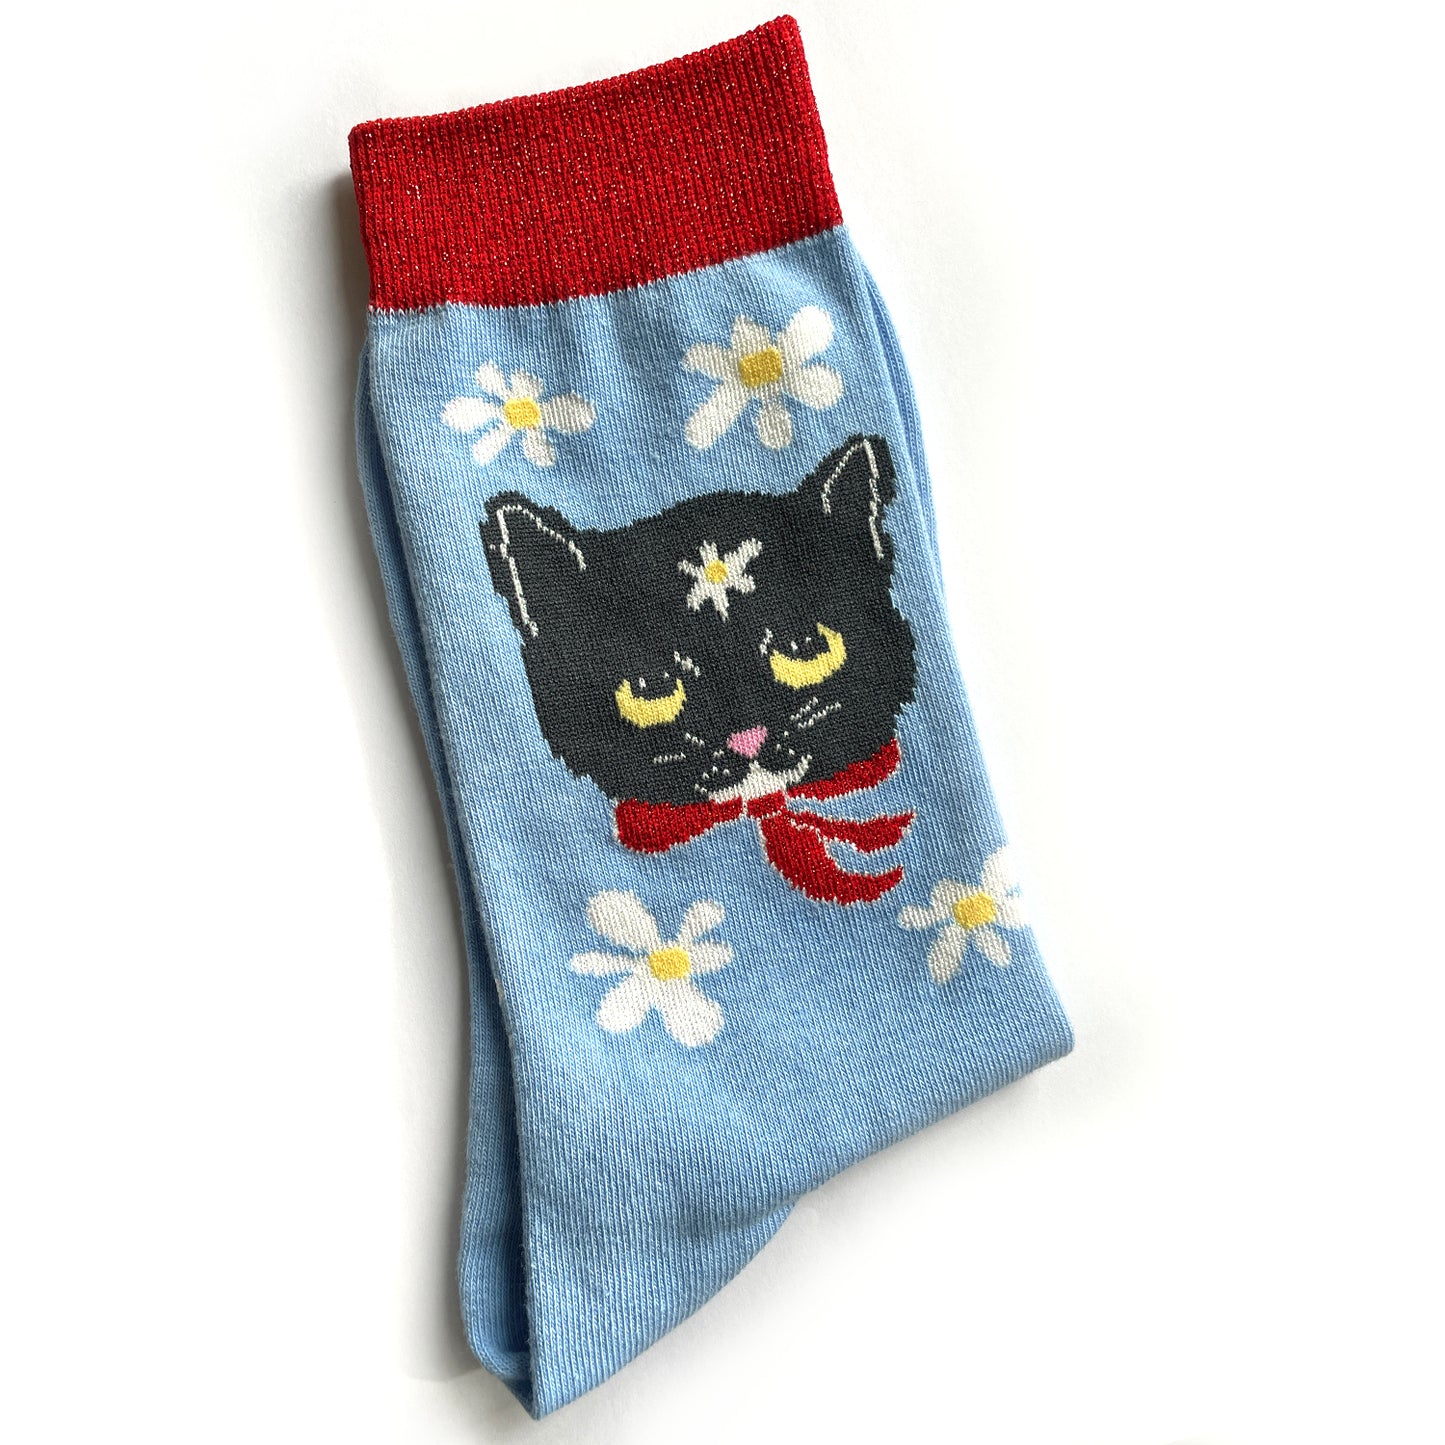 Blue sock with black cat and white daisies. 